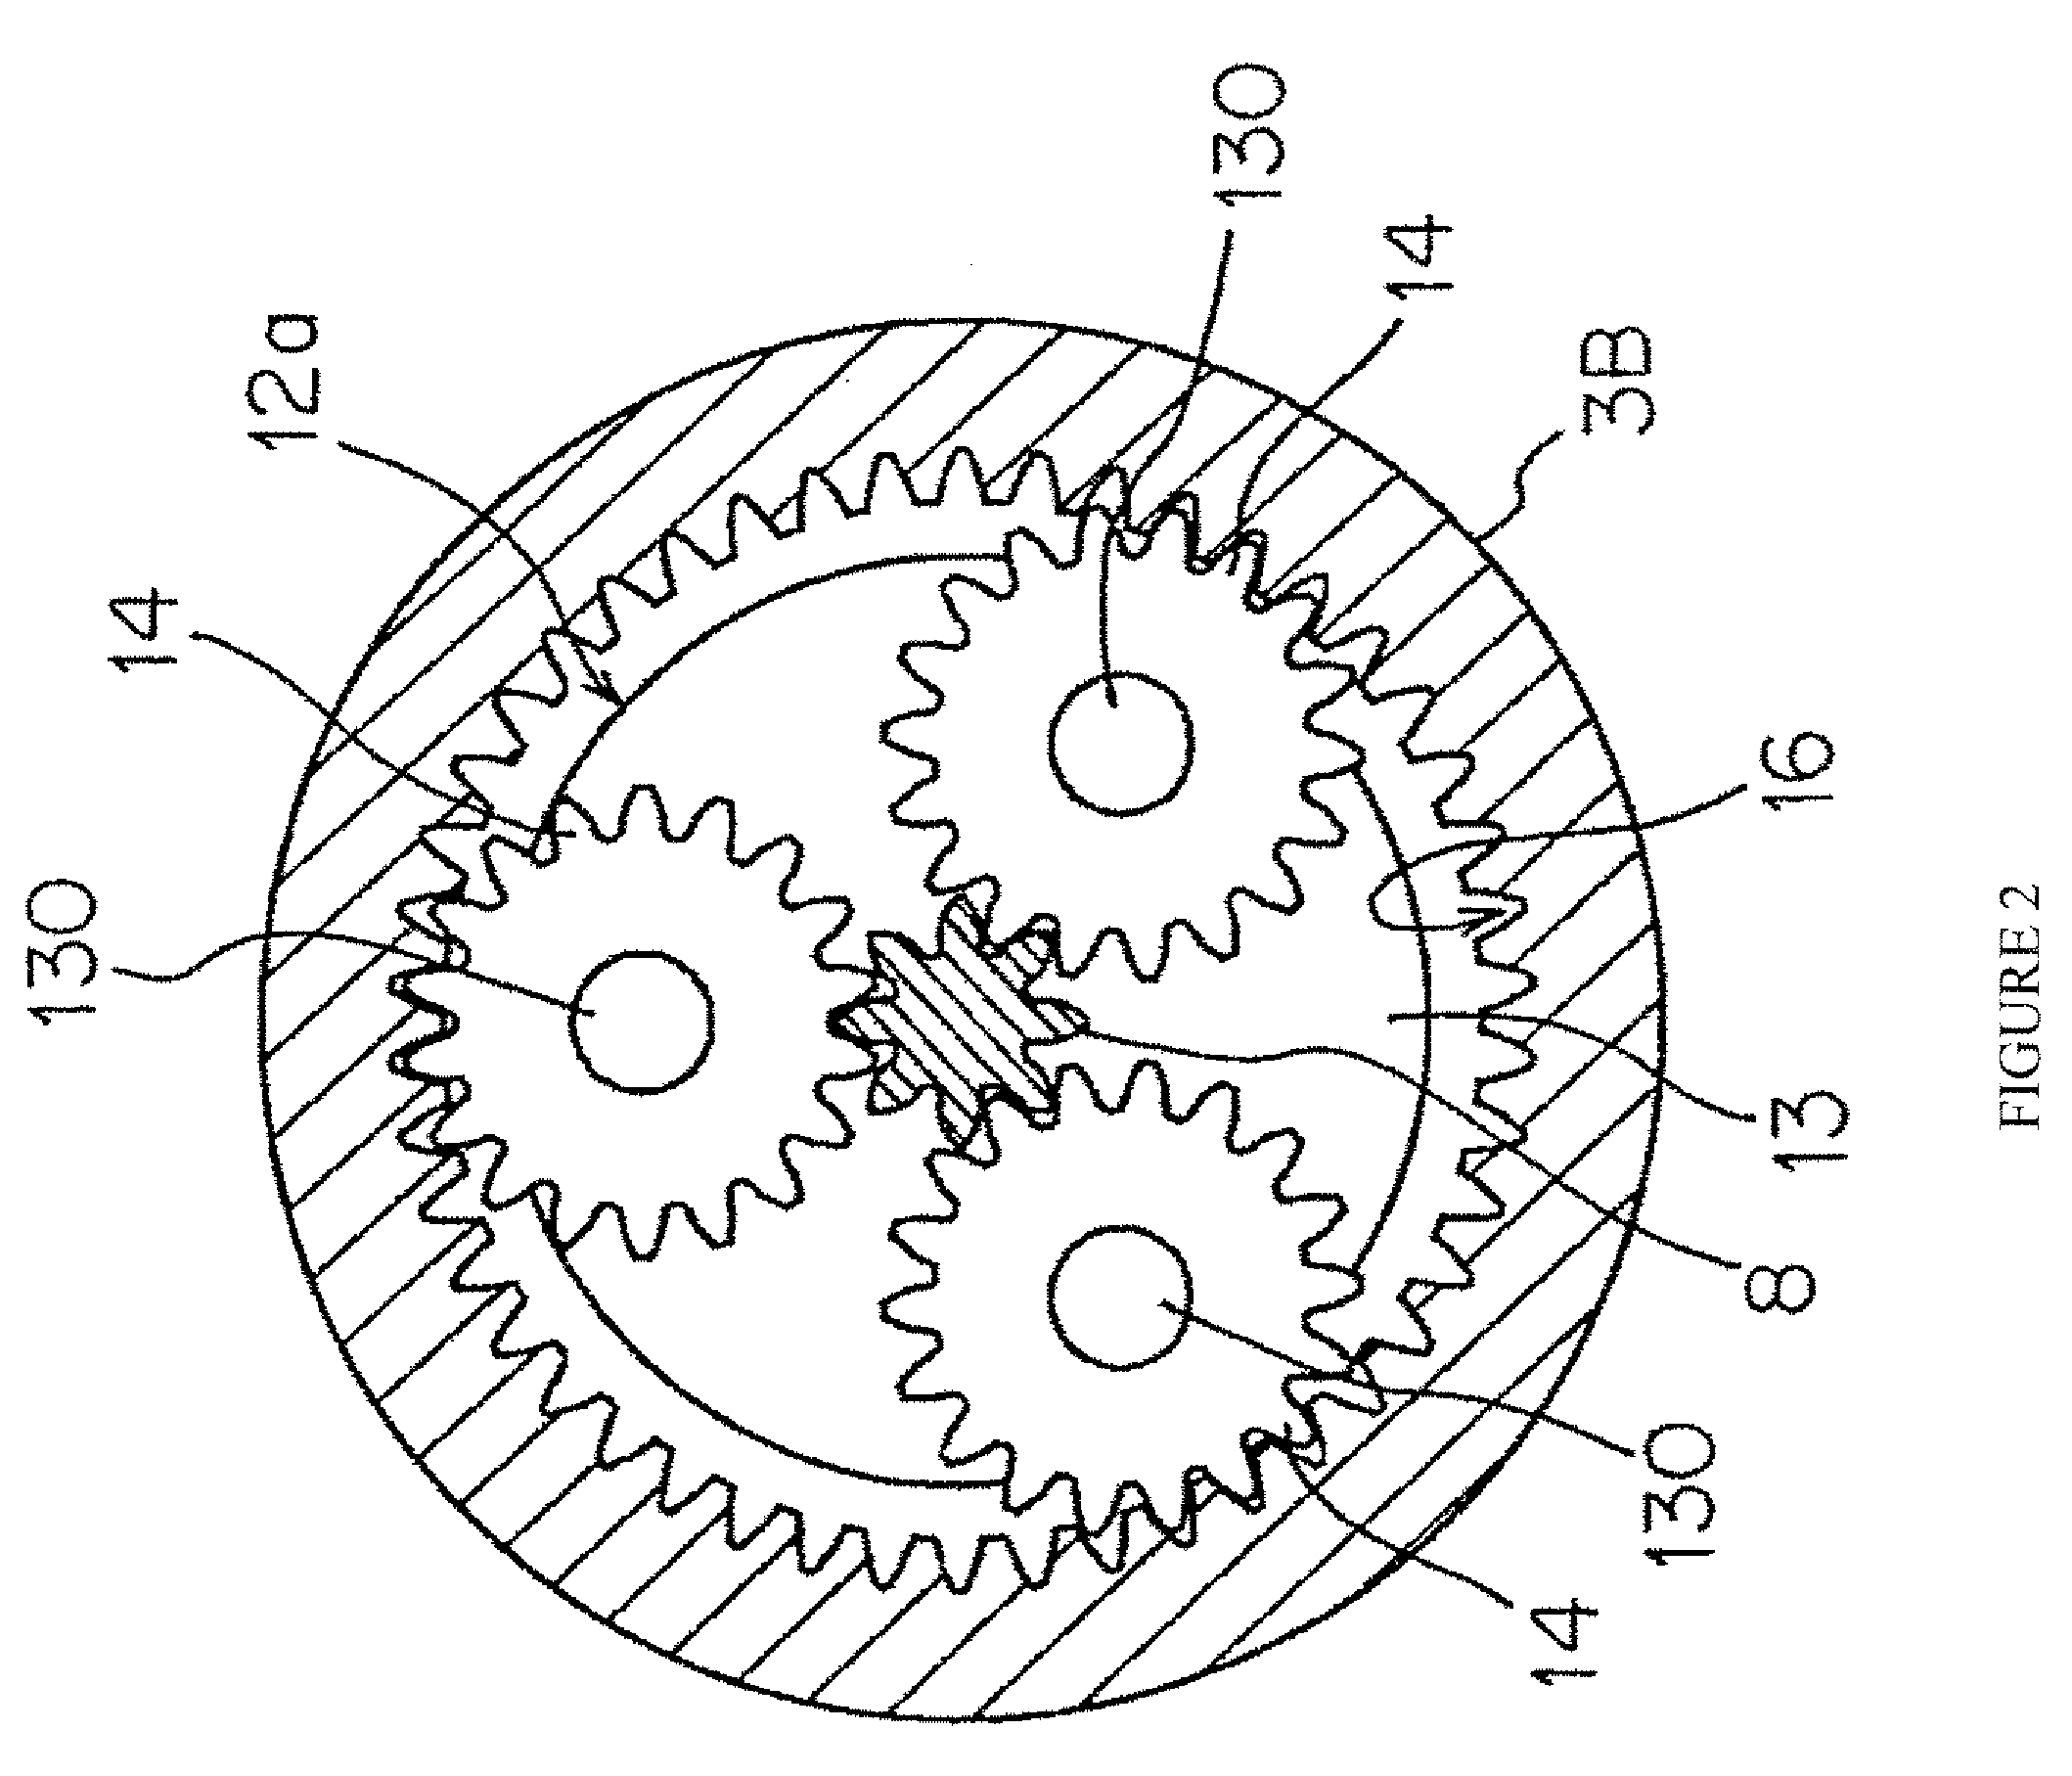 Motor shaft for micromotor, and micromotor